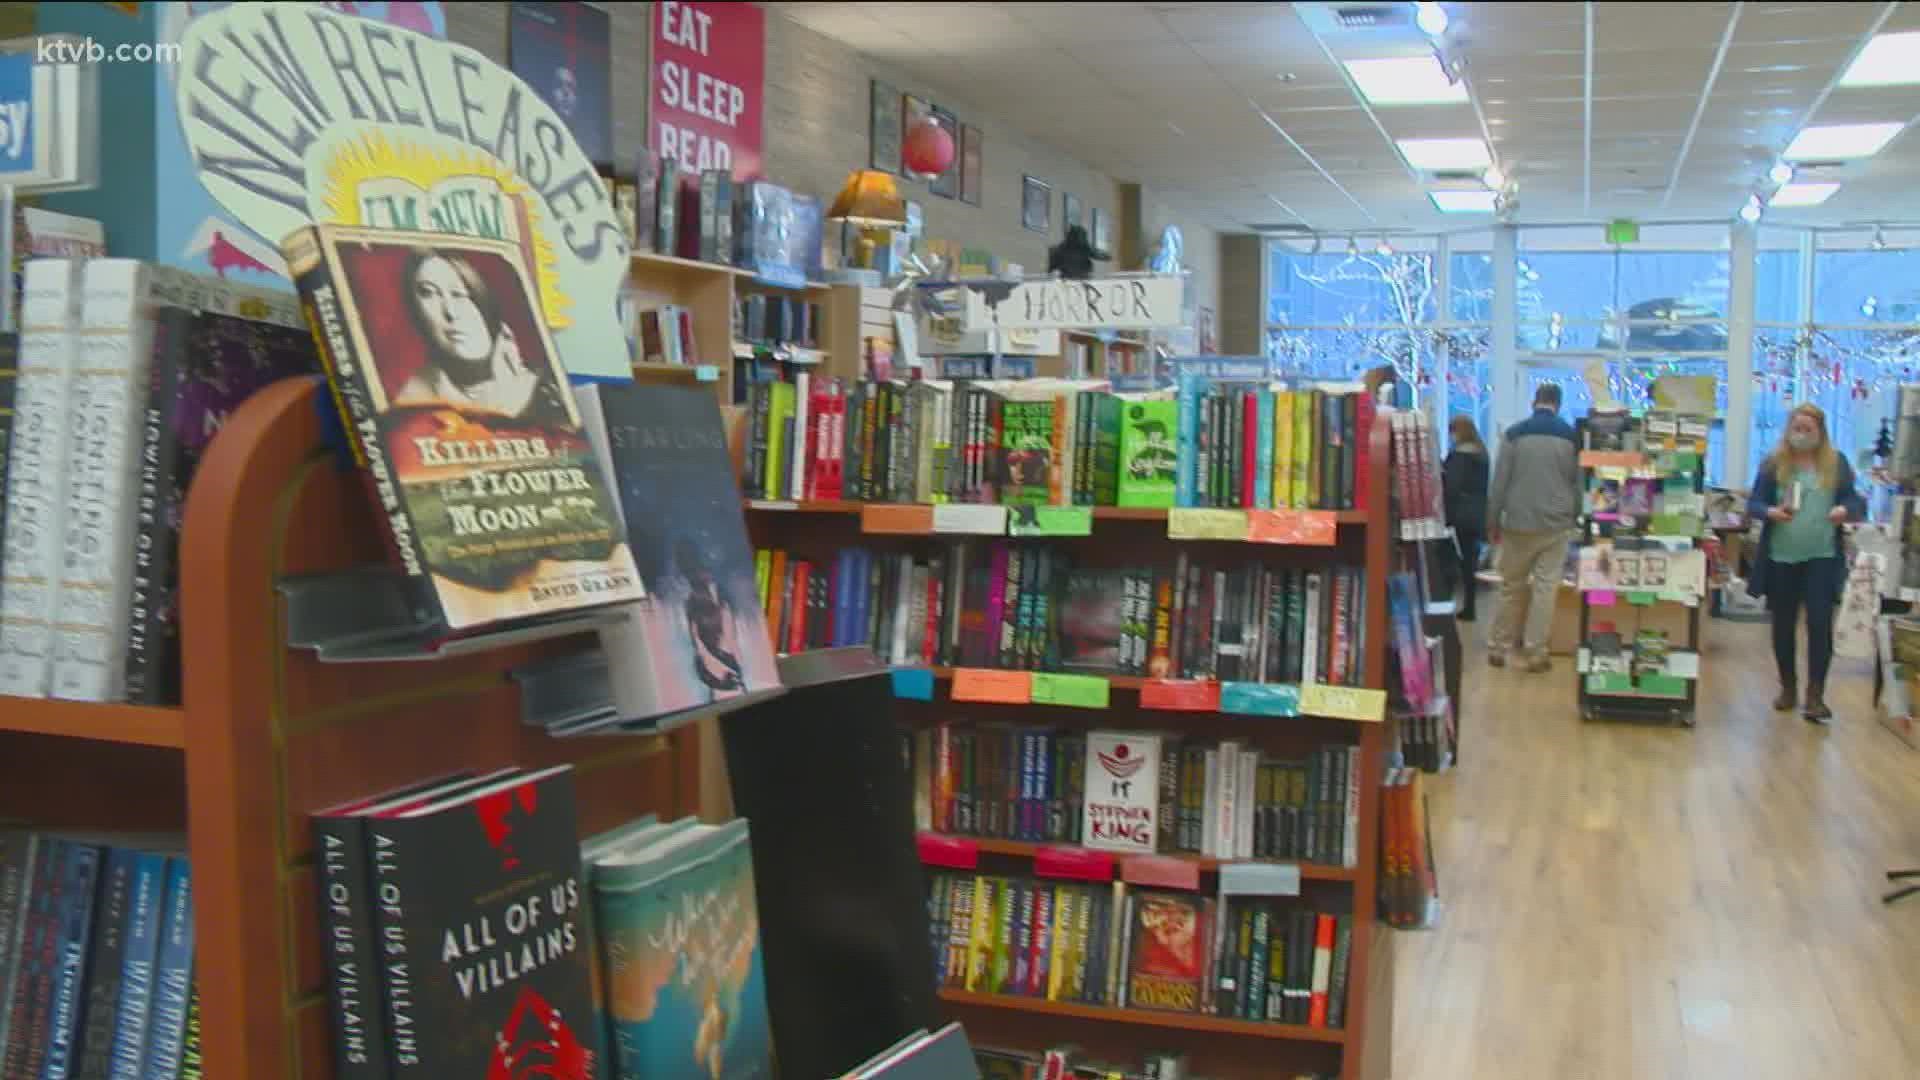 Rediscovered Books has saw a 10% increase in sales while The Record Exchange saw a 59% increase in sales from 2020.